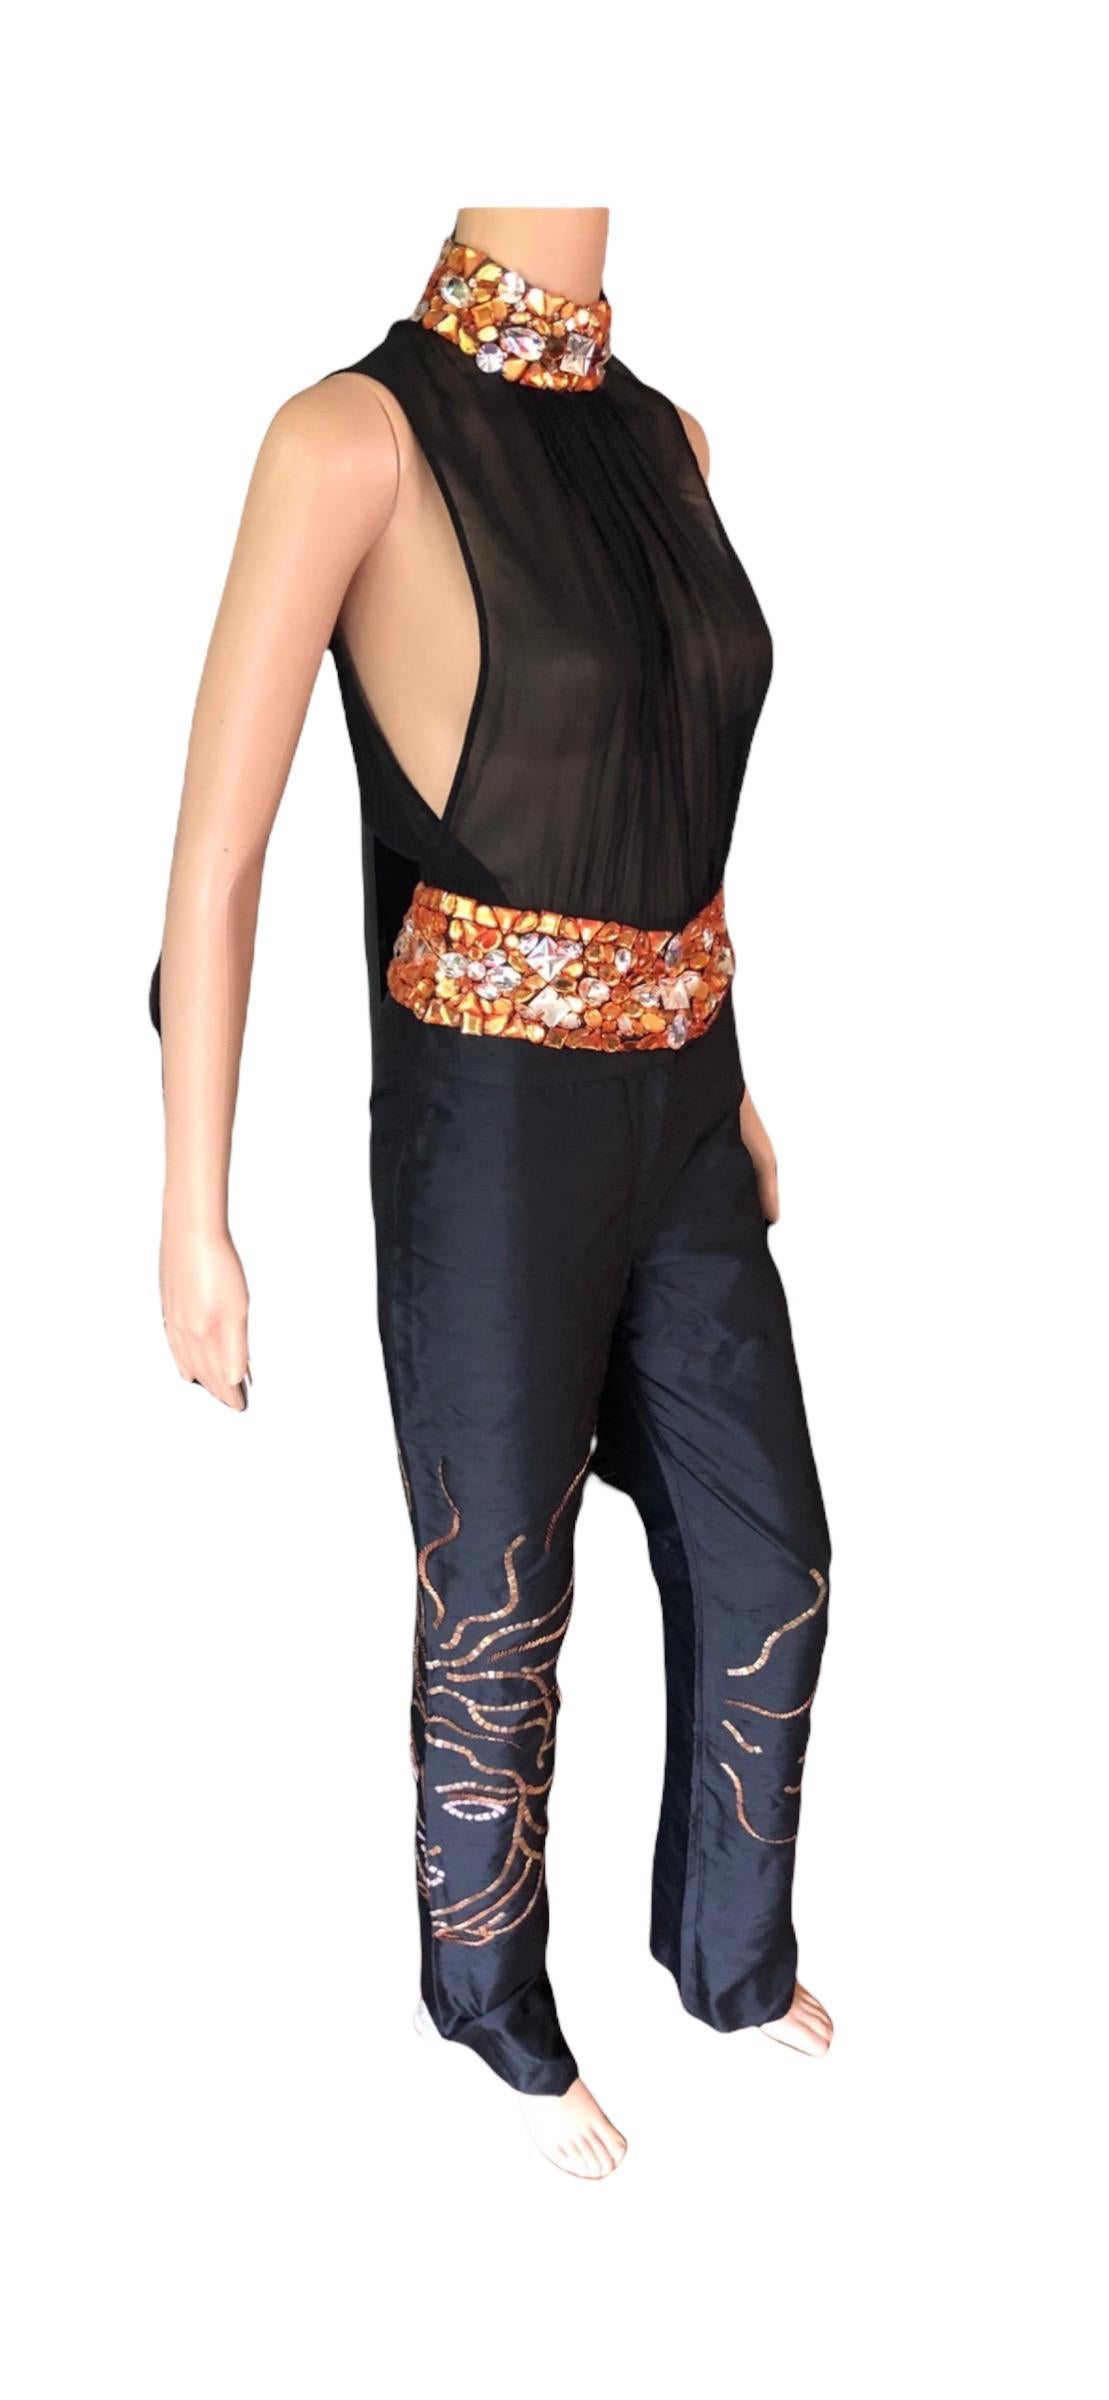 Gianni Versace Couture S/S 2000 Runway Embellished Sheer Top & Pants 2 Piece Set For Sale 3